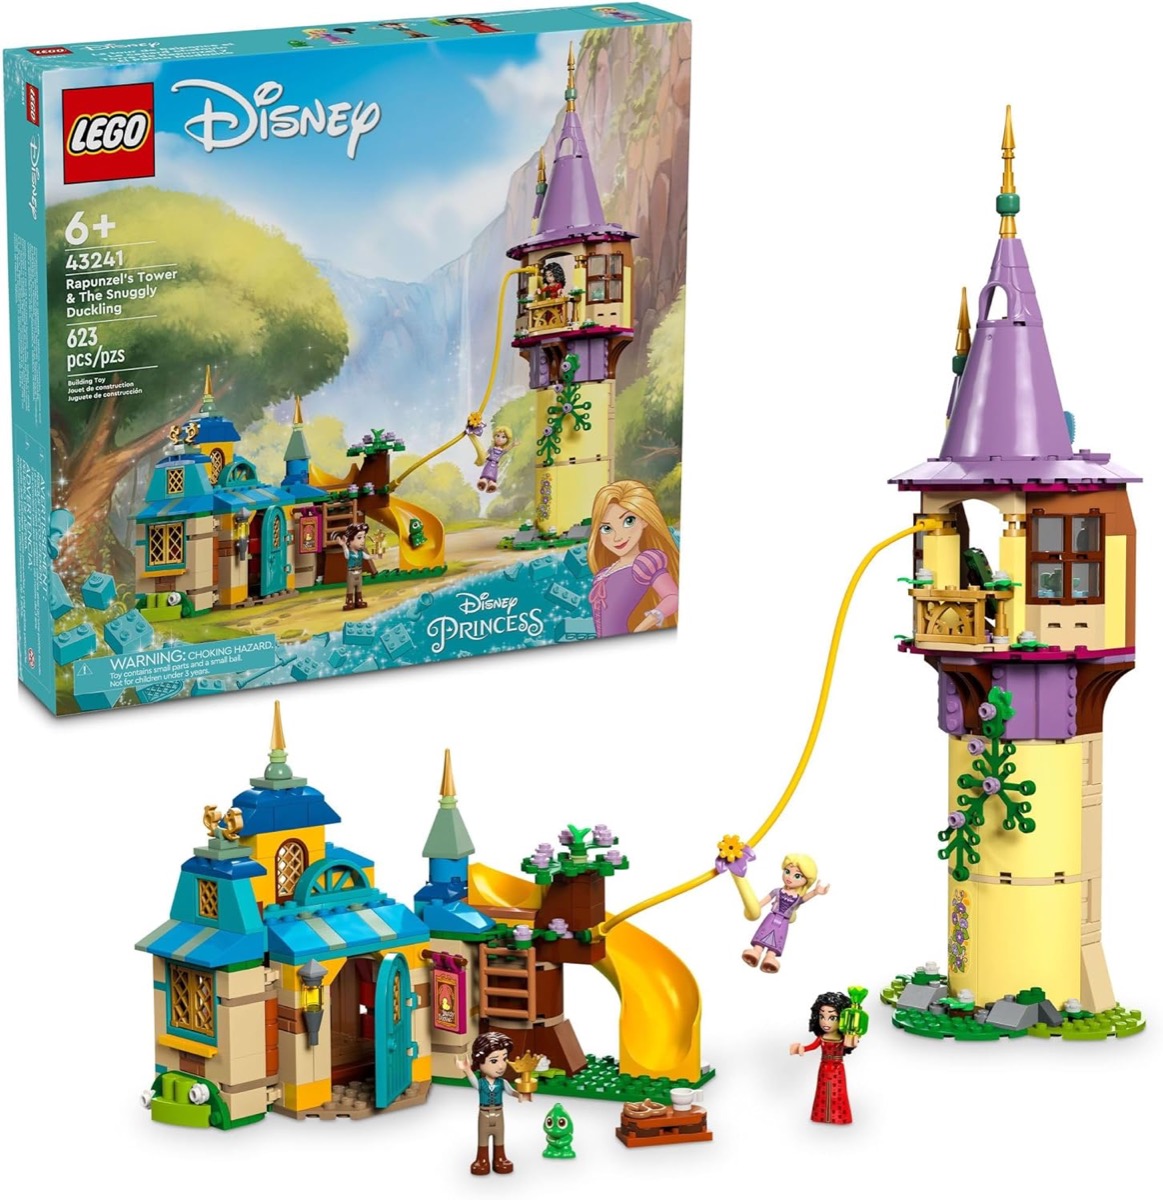 A LEGO version of Princess Rapunzel’s Tower & The Snuggly Duckling from "Tangled" 